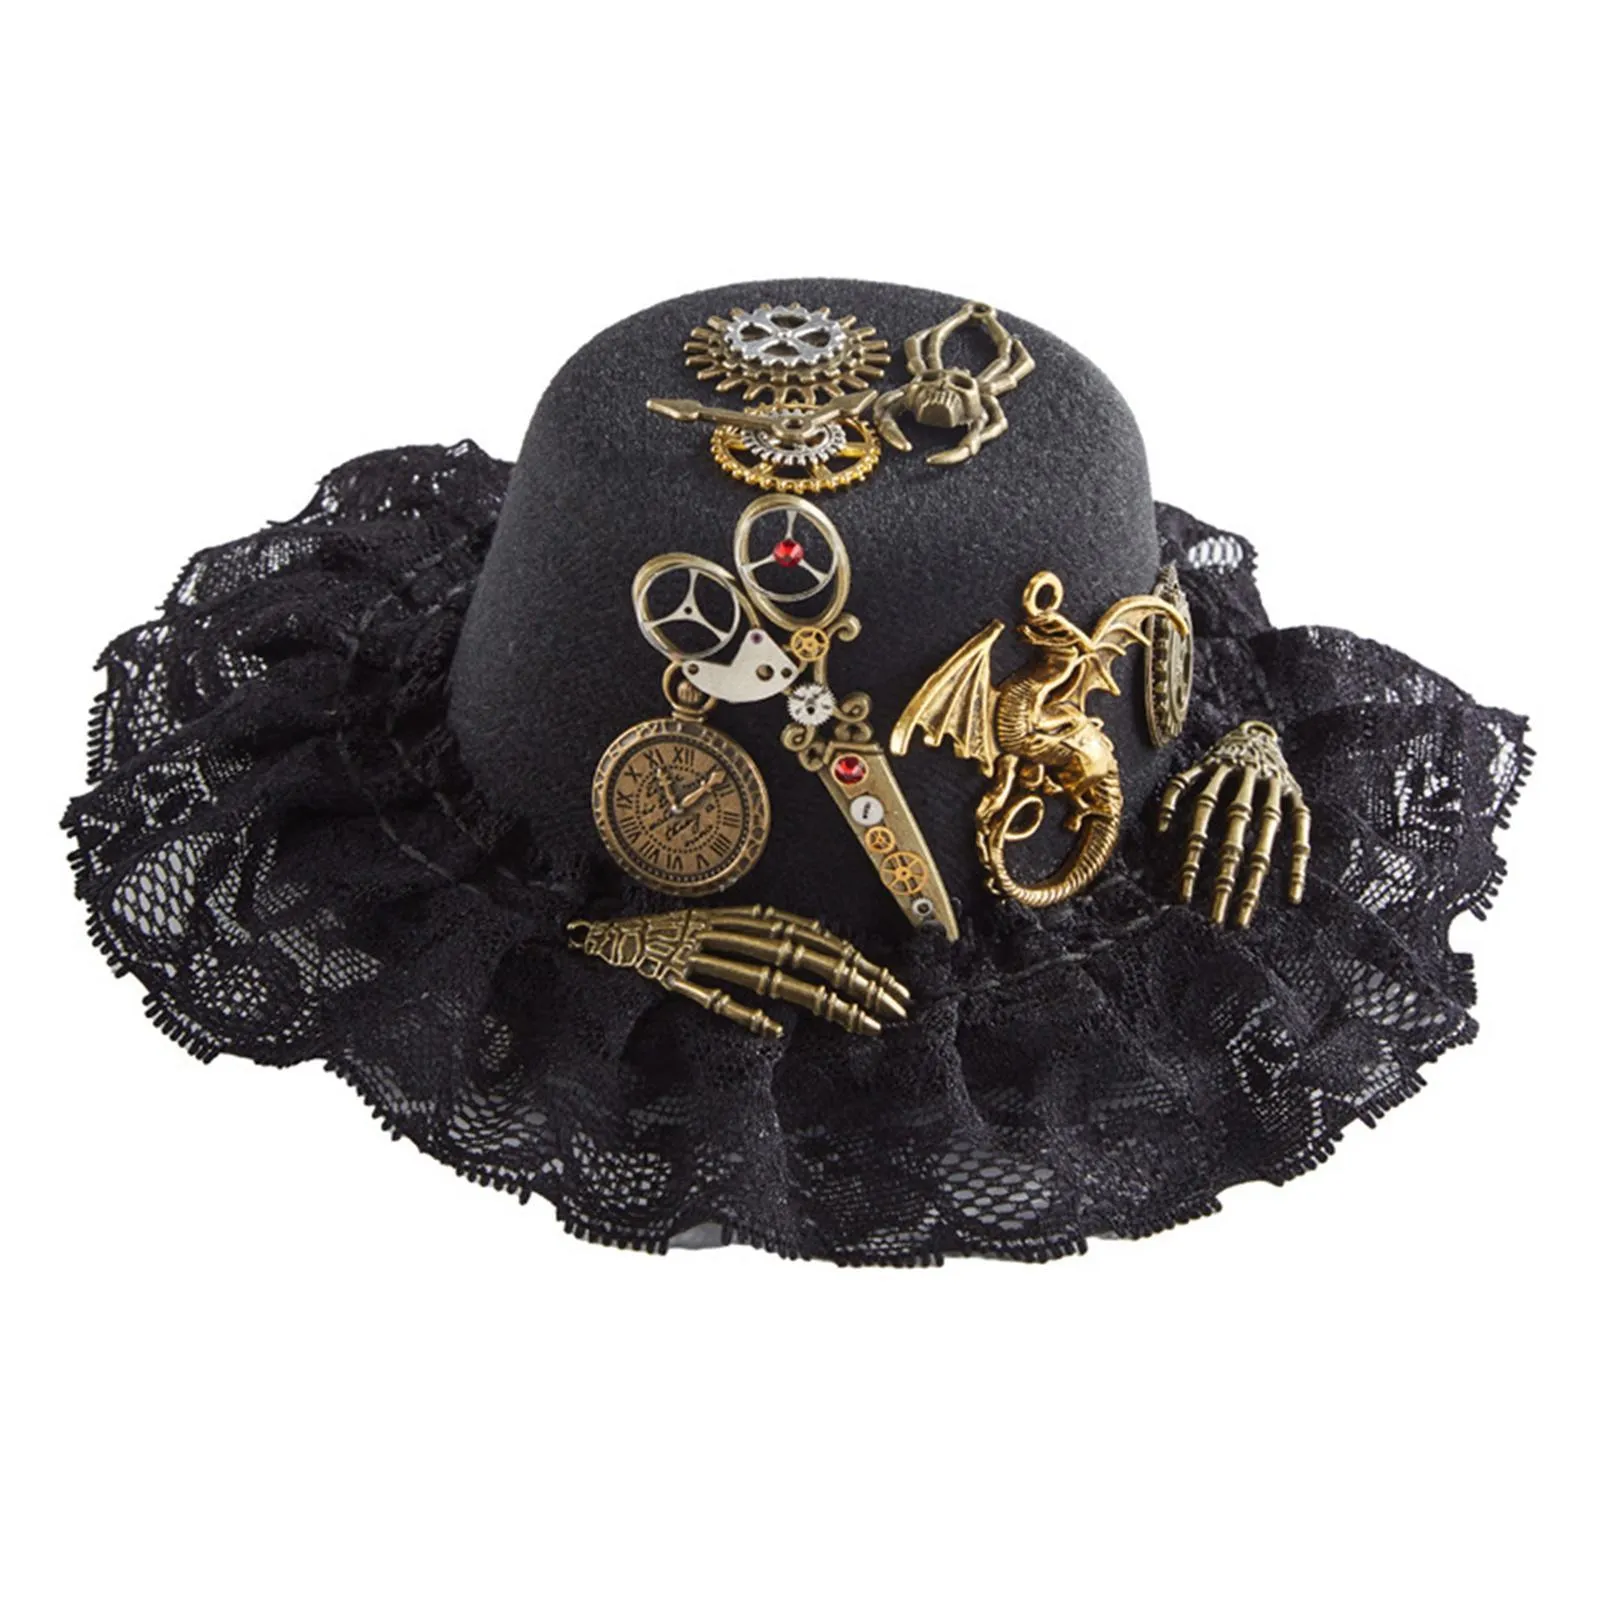 Fashion Funky Steampunk Top Hat Gothic Favors Supplies Photo Props Headwear